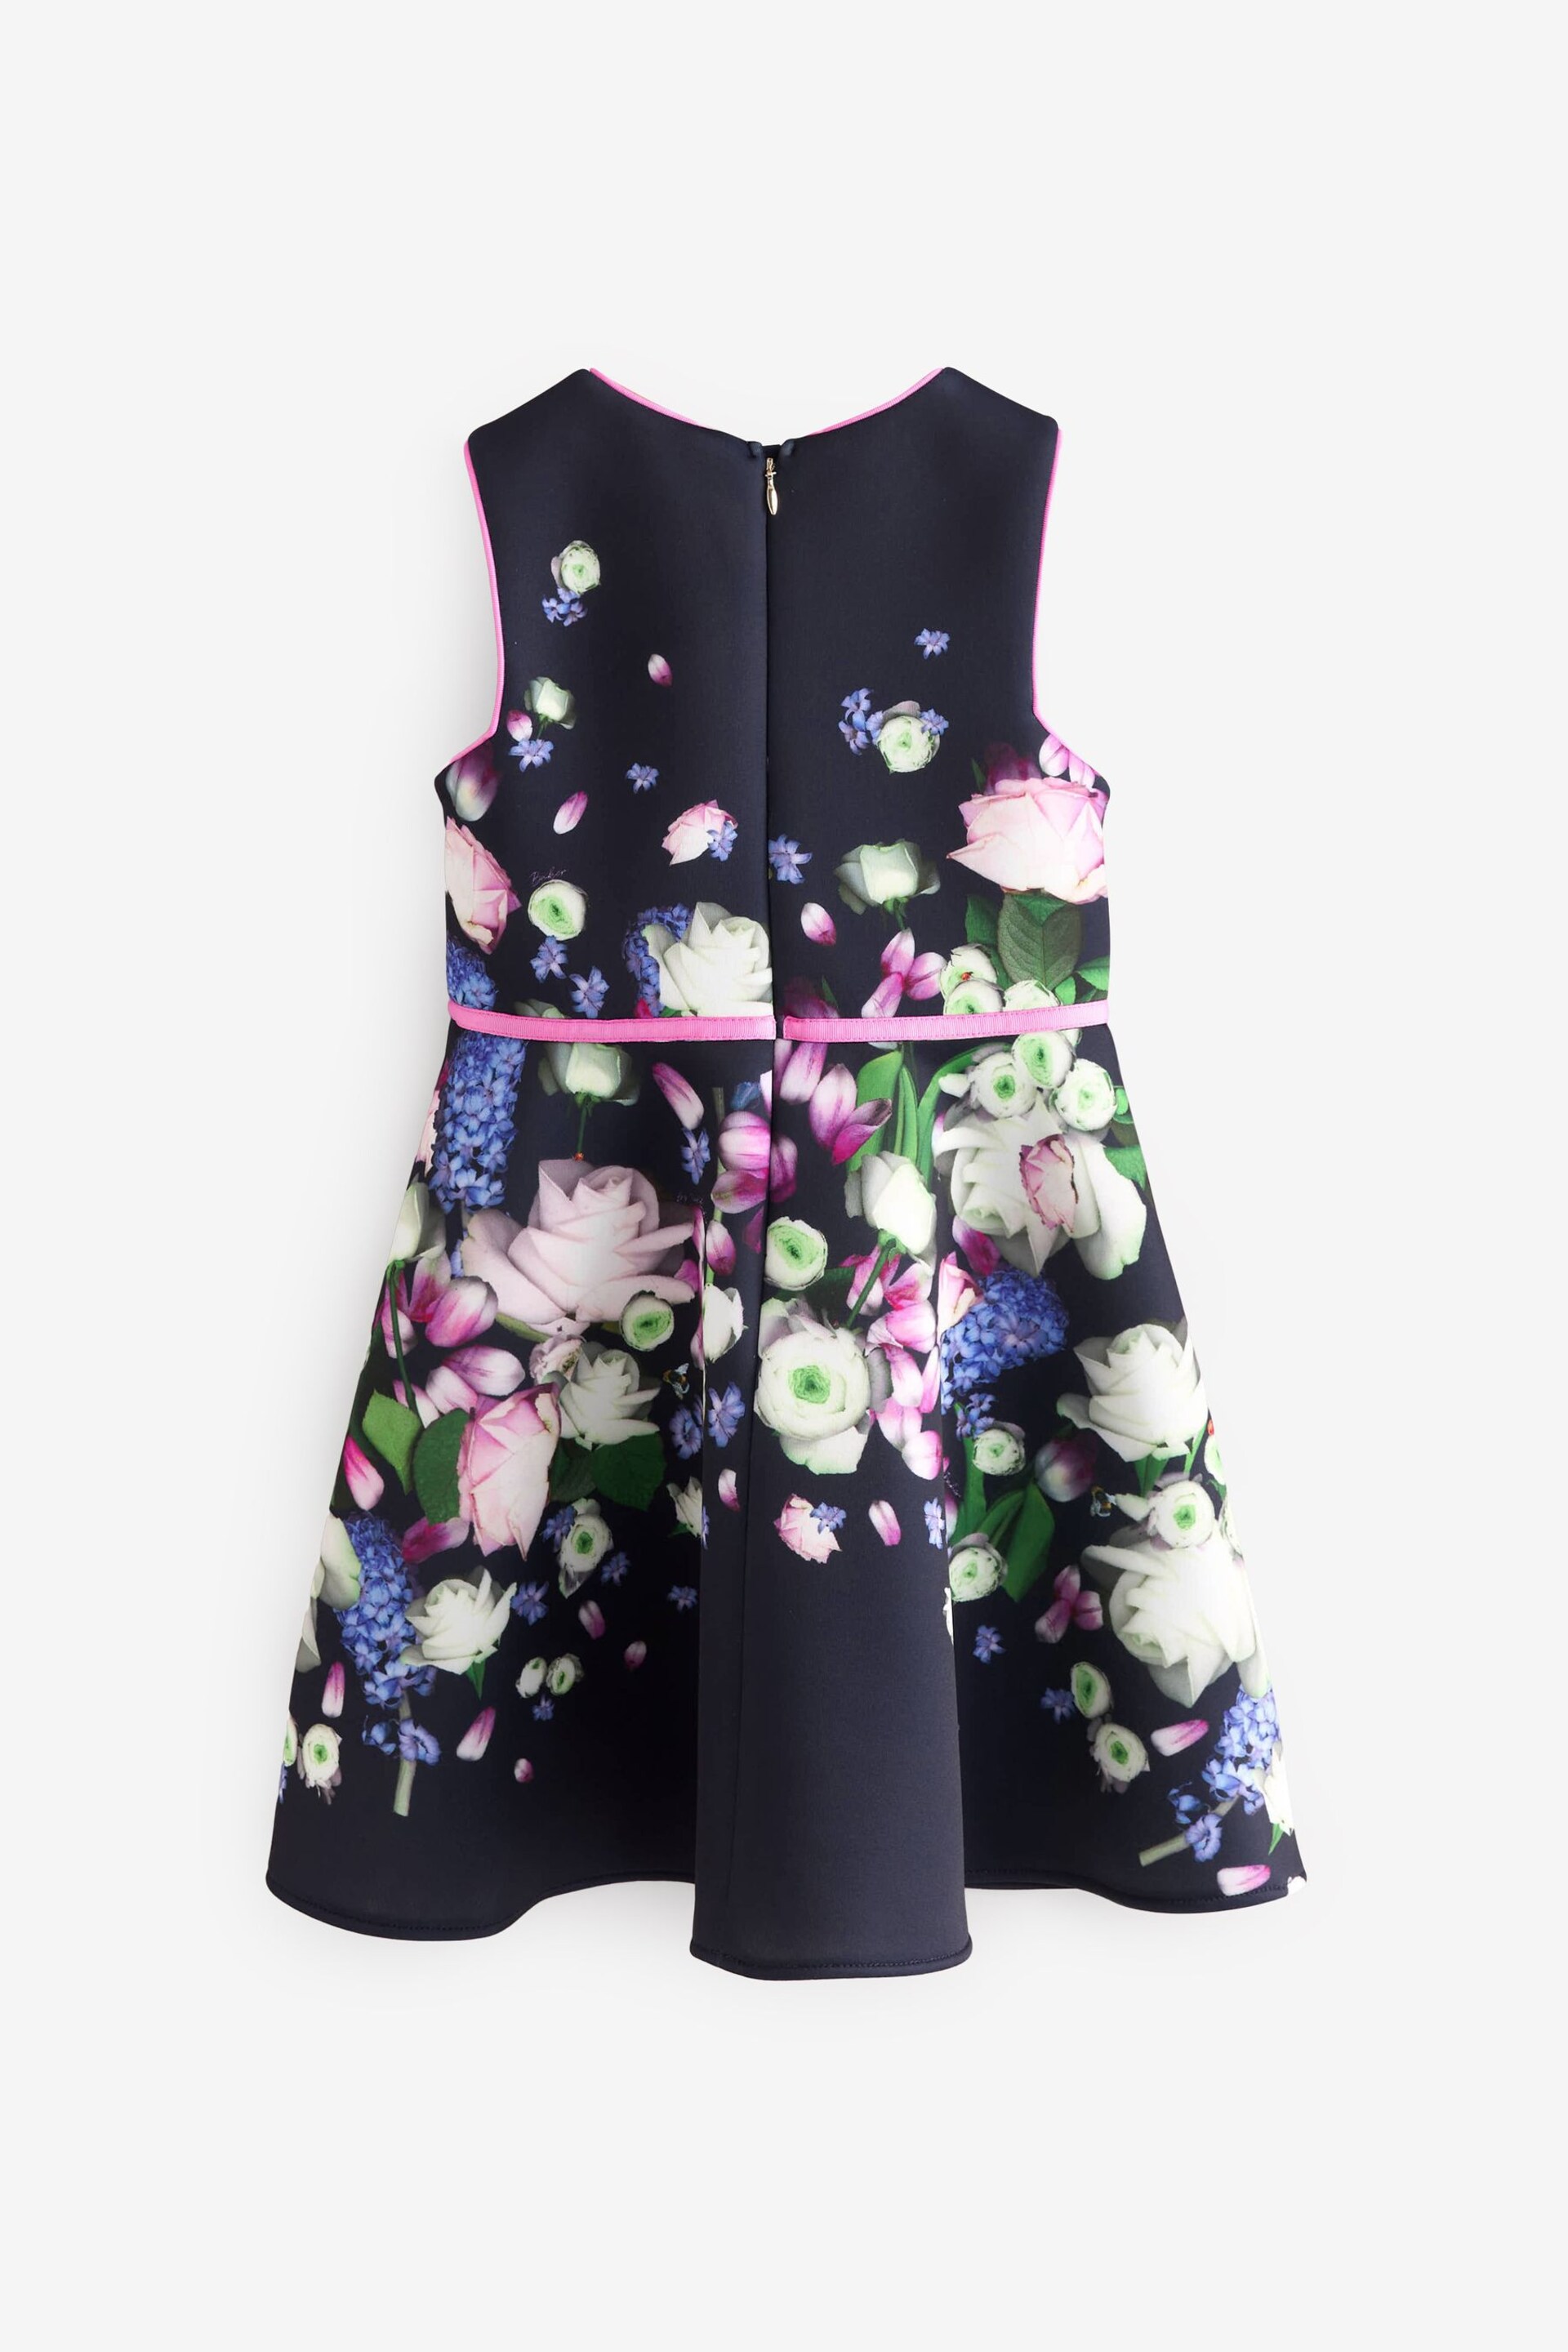 Baker by Ted Baker Navy Floral Scuba Dress - Image 6 of 8